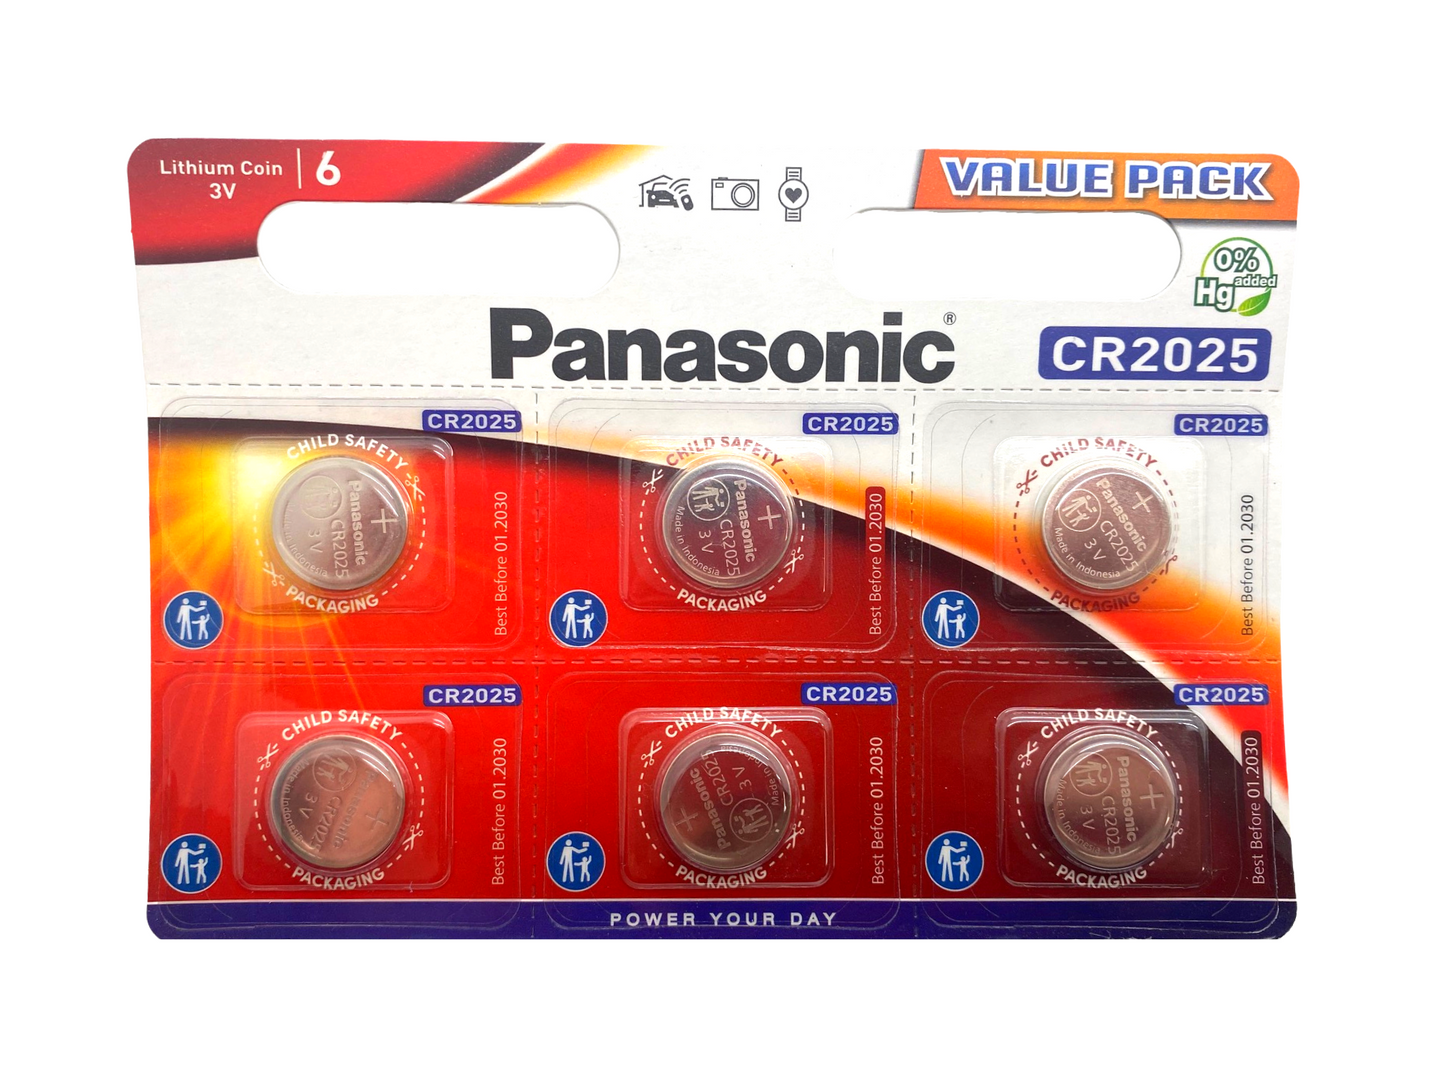 Panasonic CR2025 Lithium Cell Battery 6 Pack